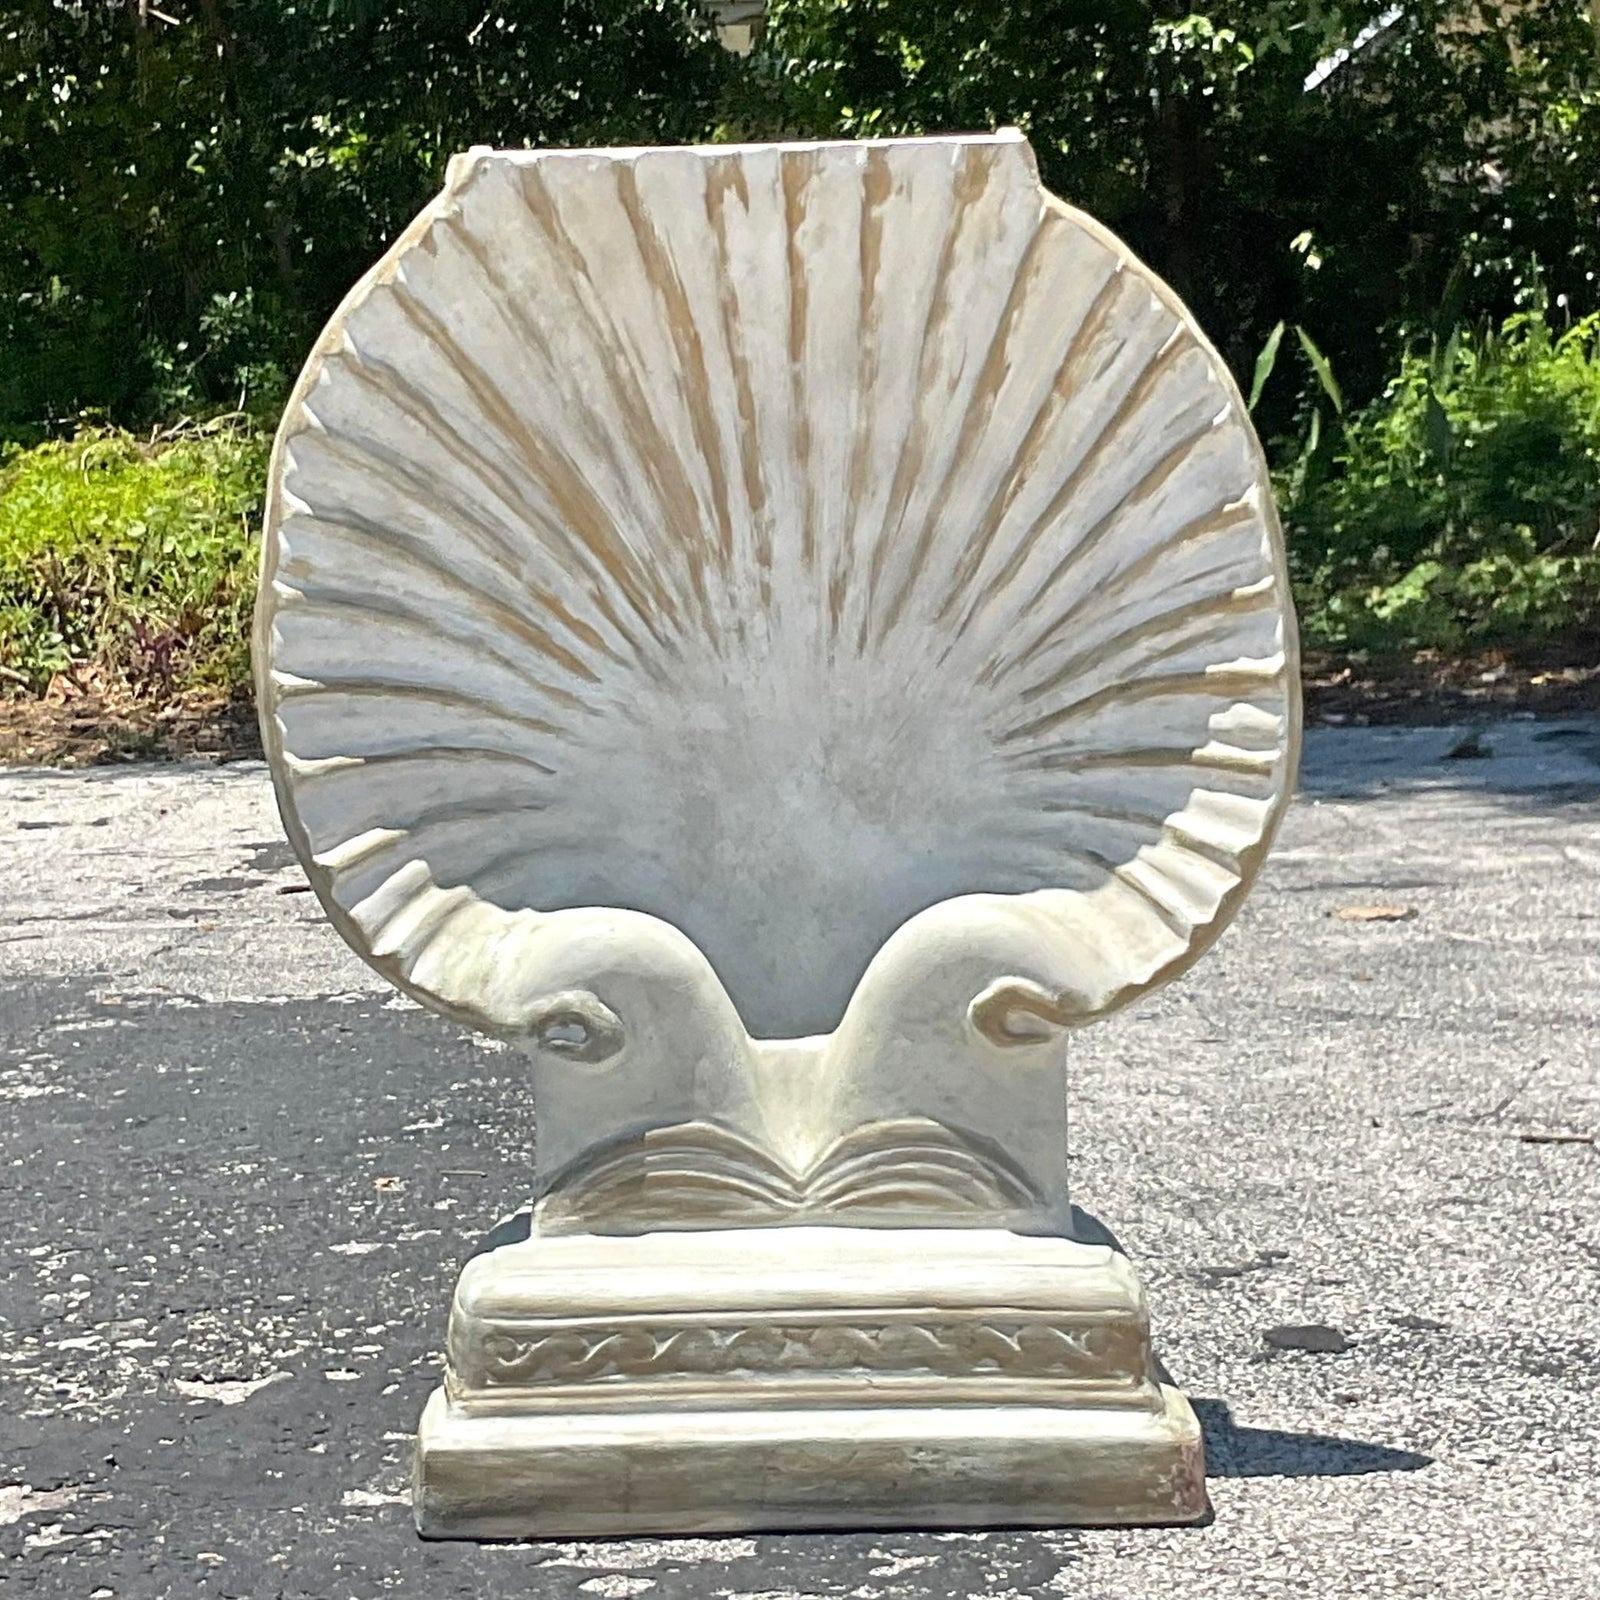 North American Mid 20th Century Vintage Coastal Plaster Clam Shell Console Table Pedestal